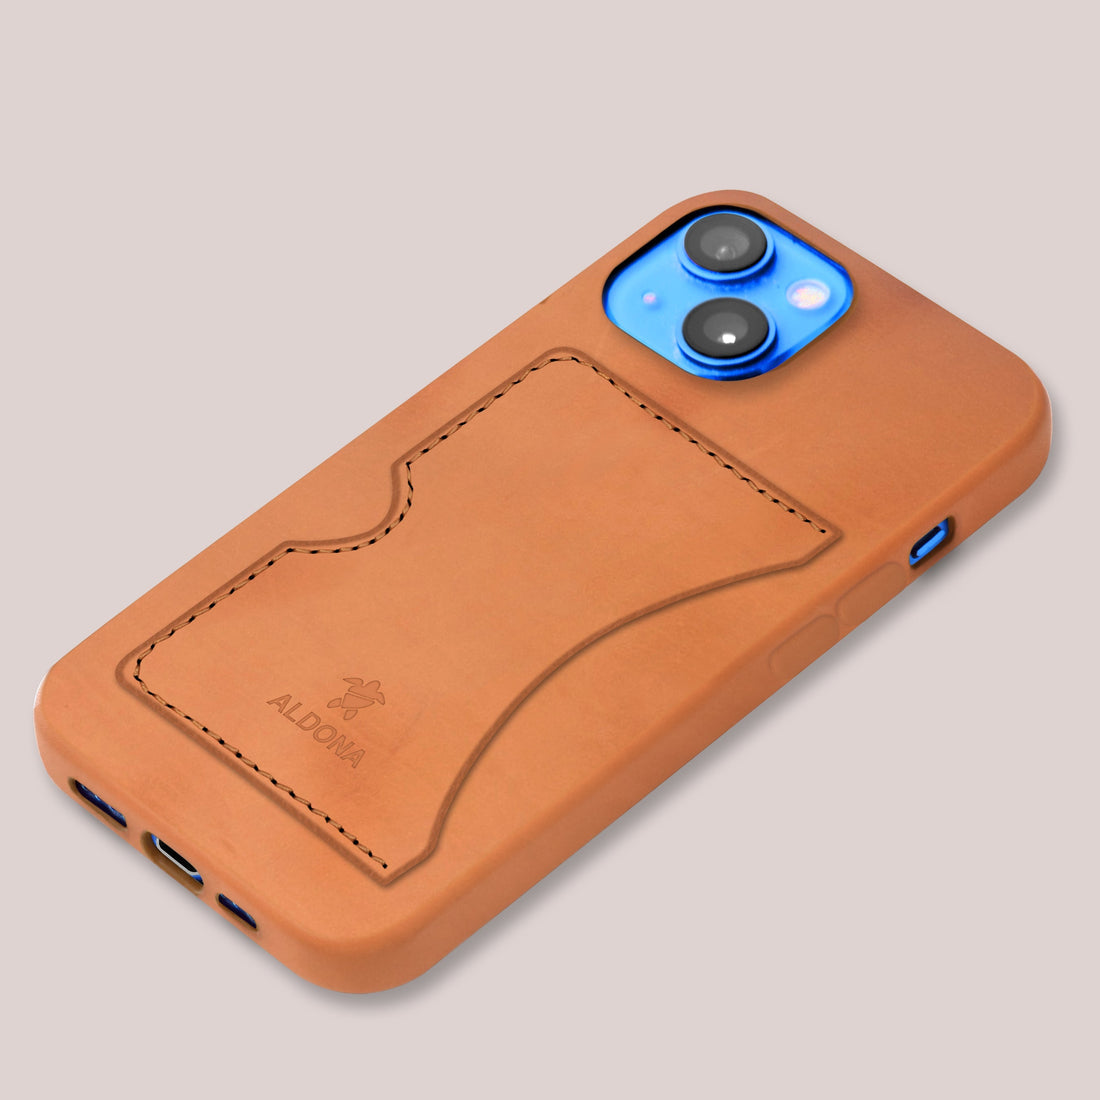 Baxter Card Case for iPhone 13 Pro Max - Vintage Tan